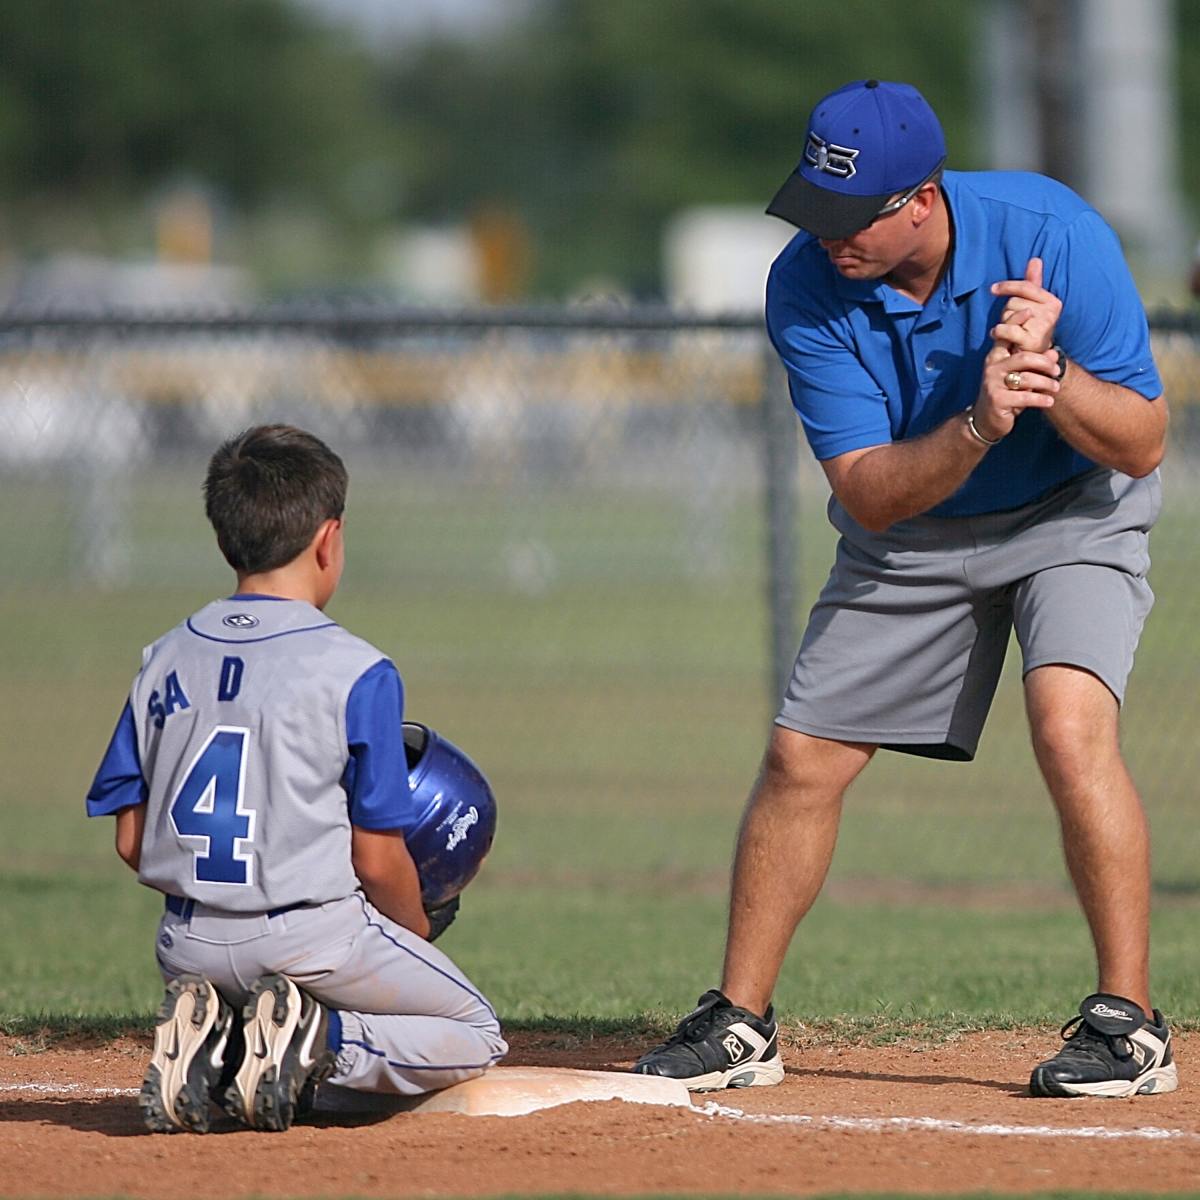 In sports, especially youth sports, bad coaches can create a horrible environment.